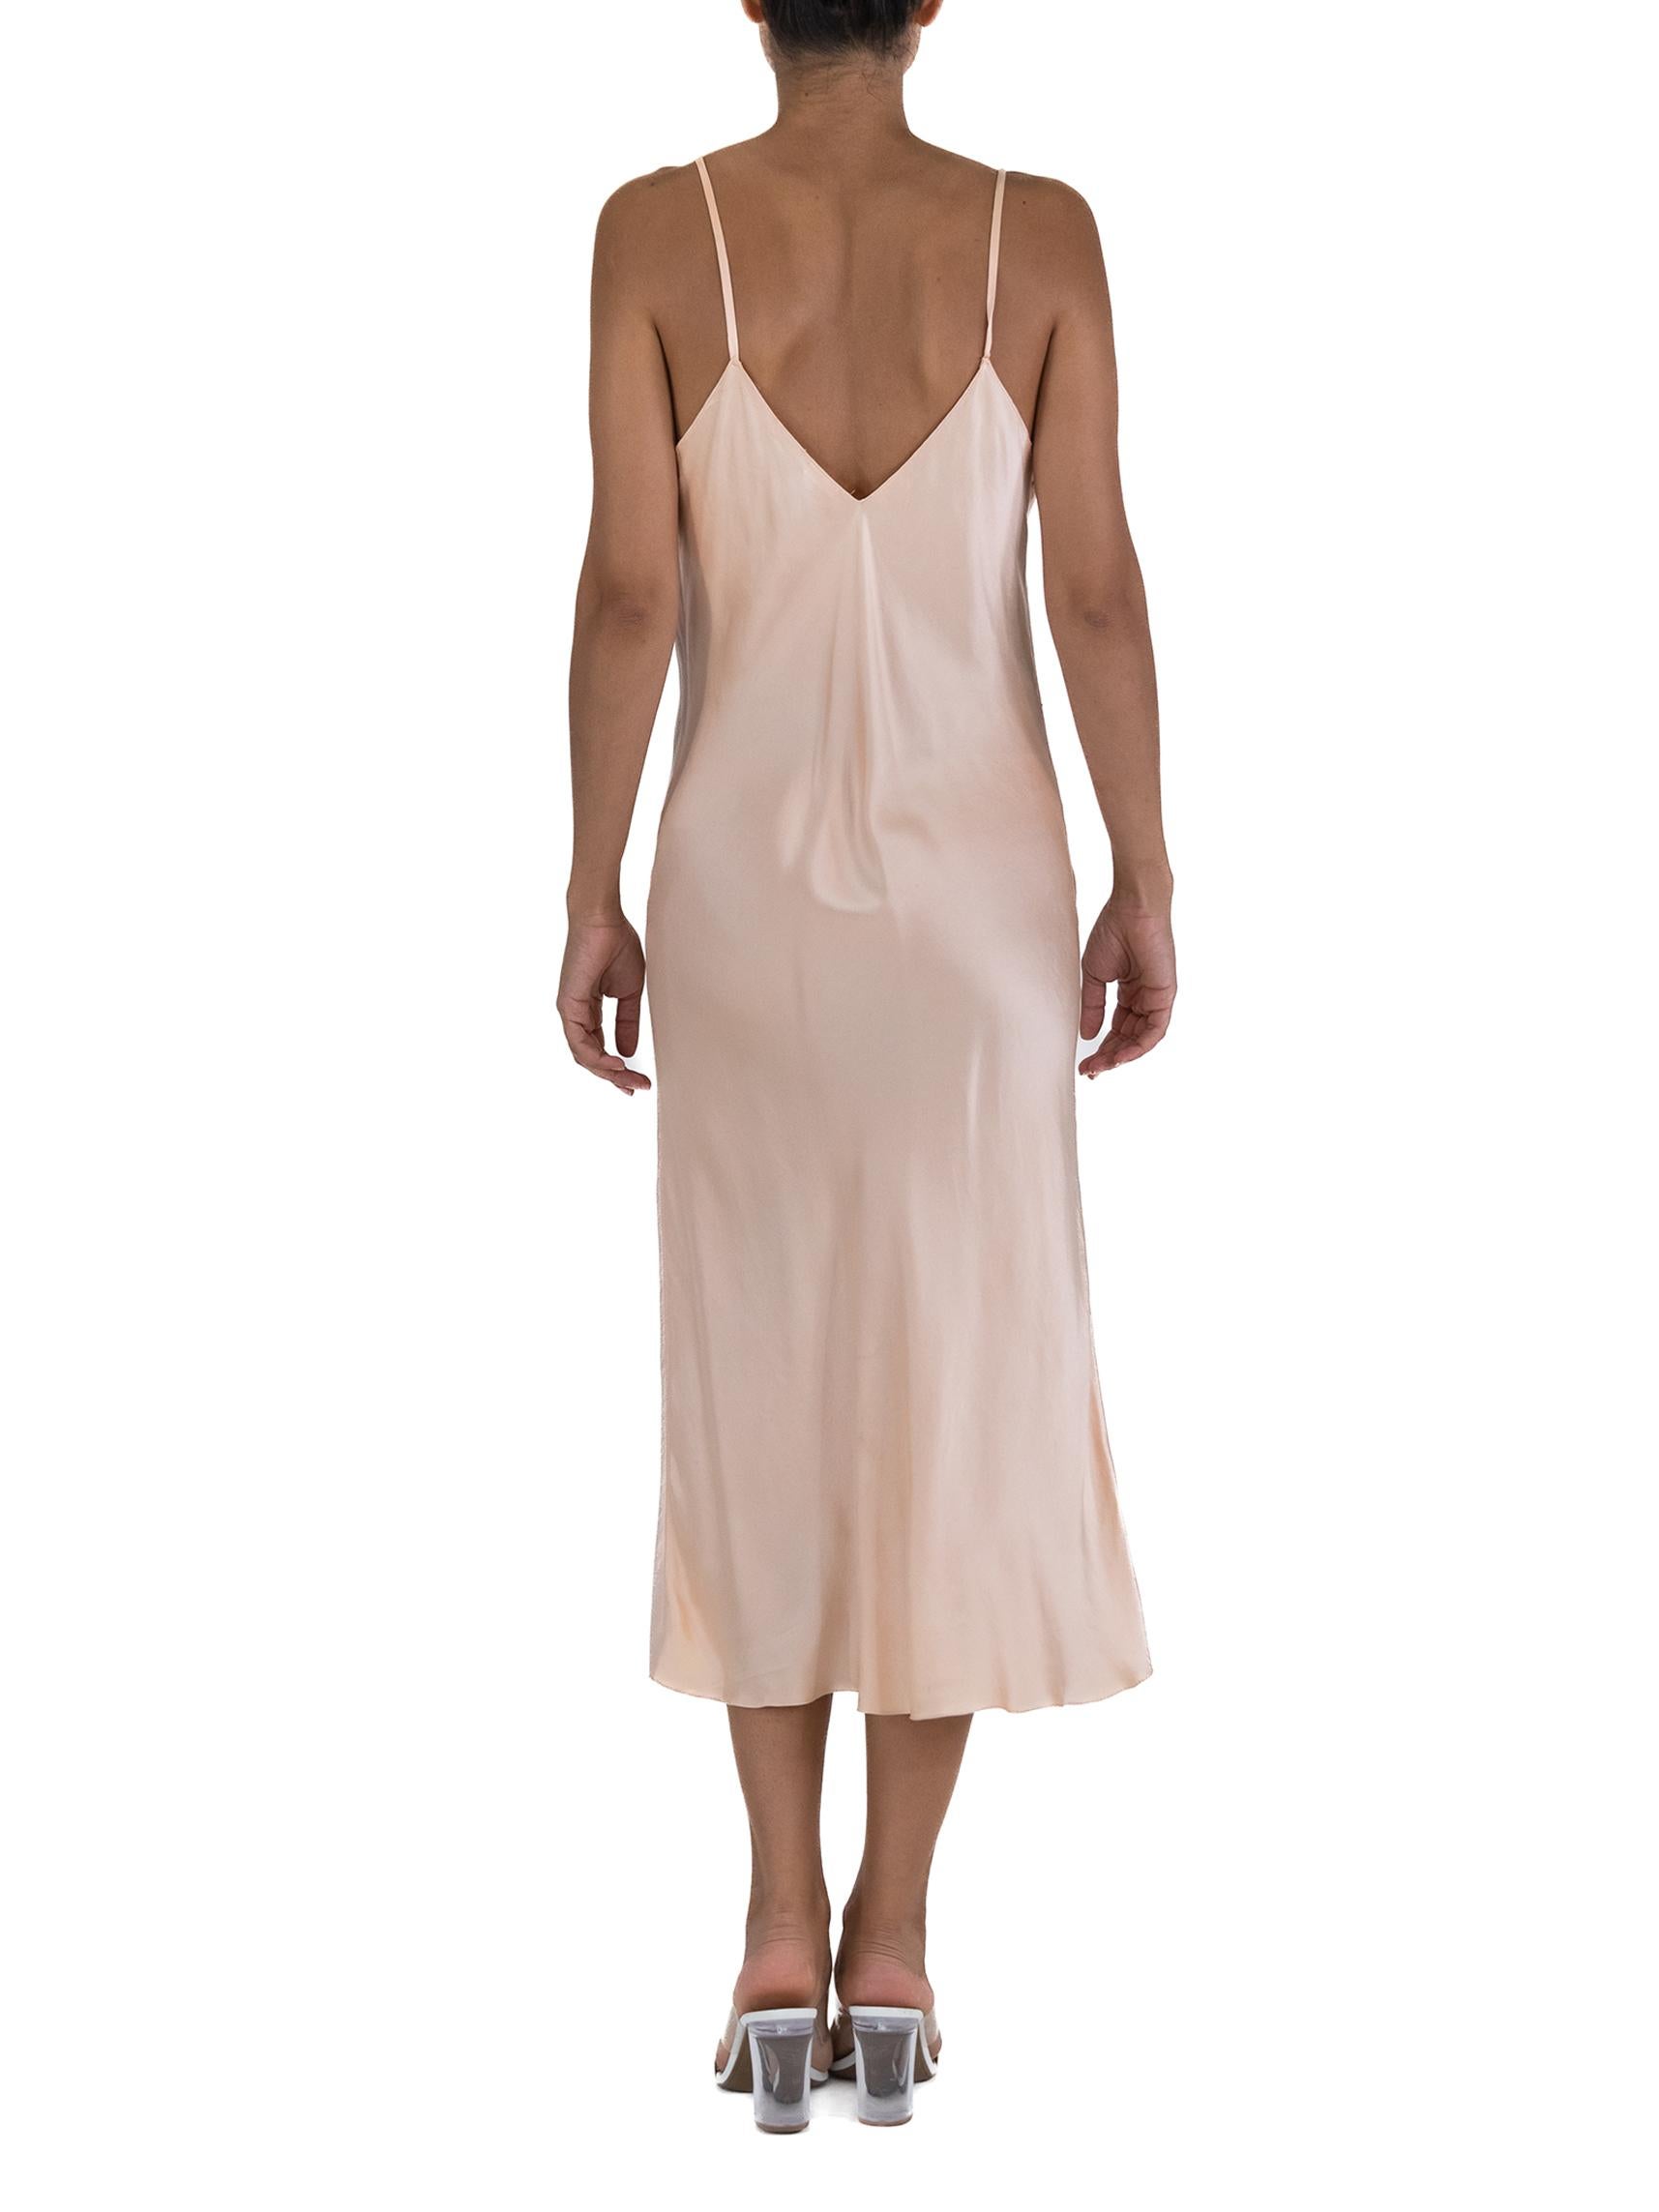 1940S Bontell Peach Silk Slip All Handmade With Lace Detail For Sale 3